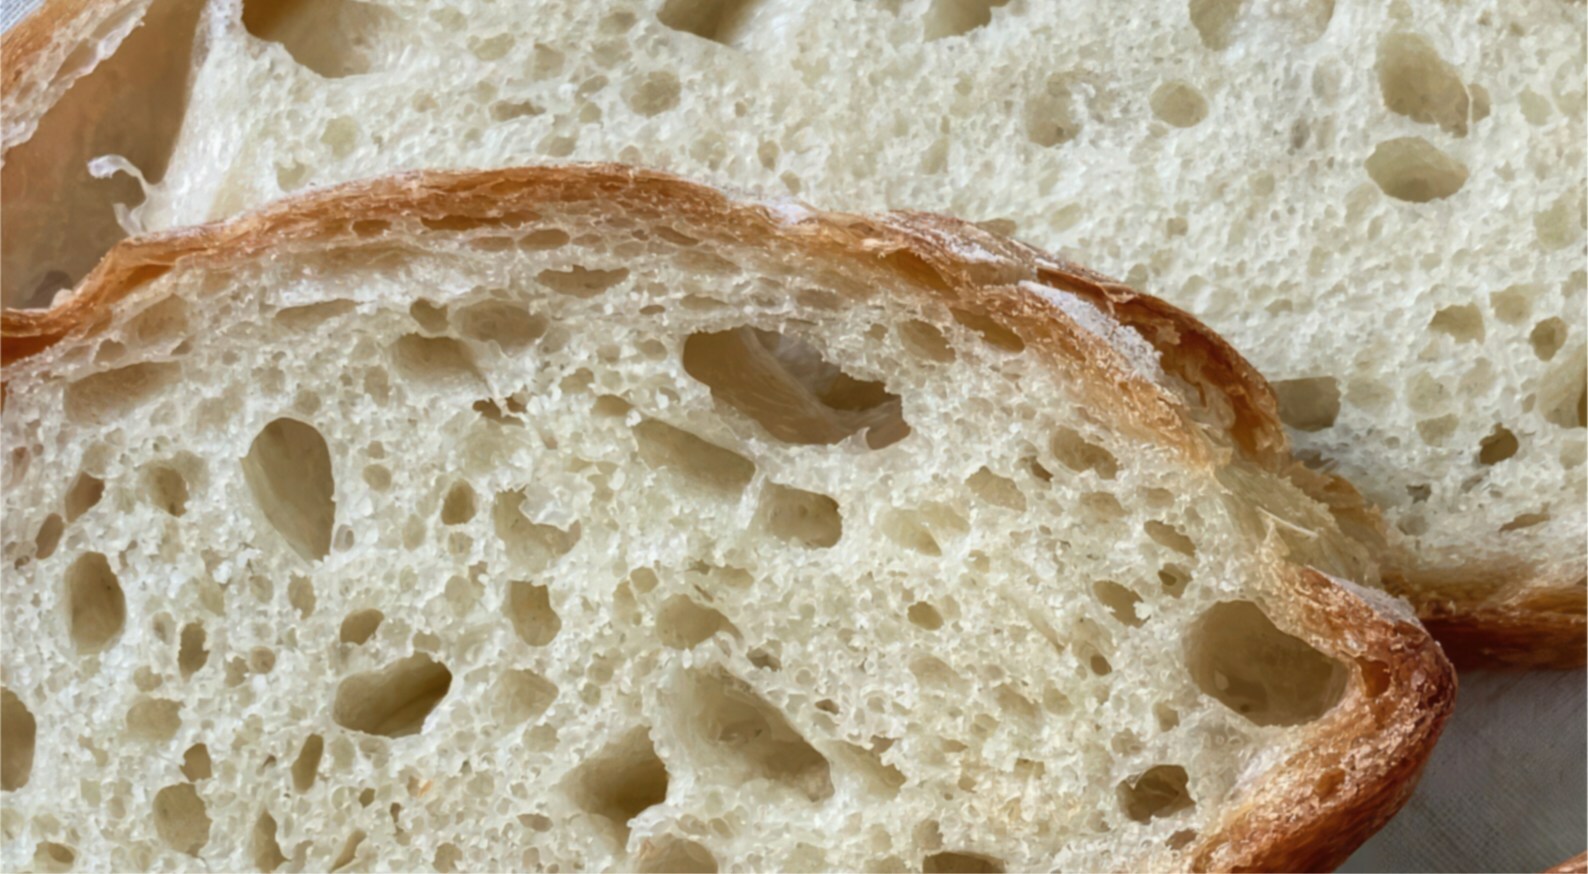 Il Granaio delle Idee and Ginkgo Bioworks Announce Strategic Collaboration to Optimize Sourdough Strains for Bakery Products